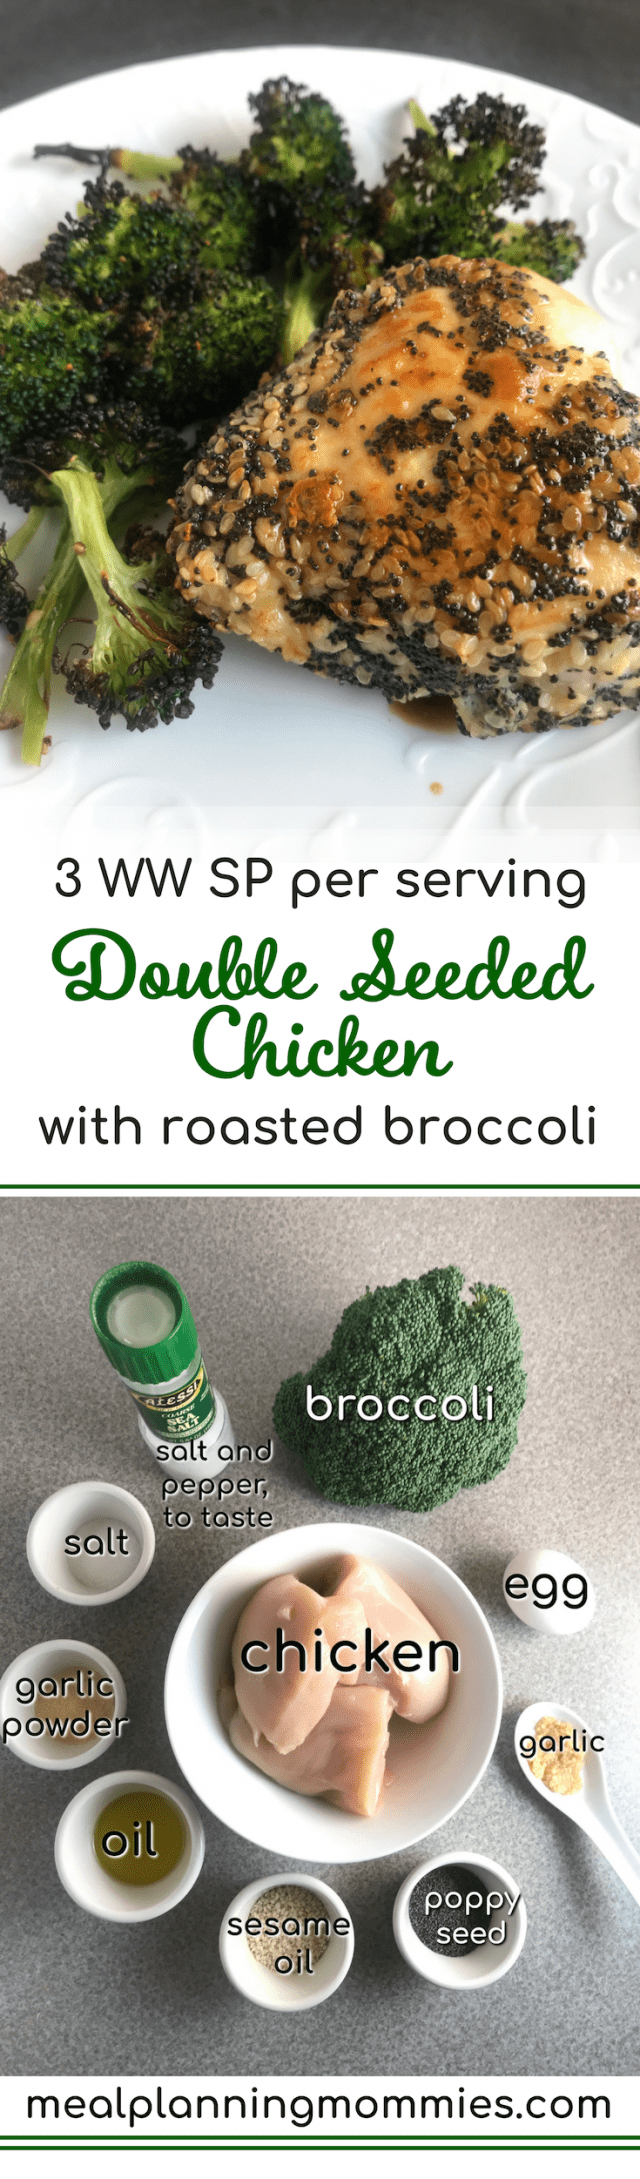 This Double Seeded Chicken uses poppy seeds and sesame seeds to create a crunchy outside to chicken breasts. Healthy and delicious! 3 WW SP per serving.